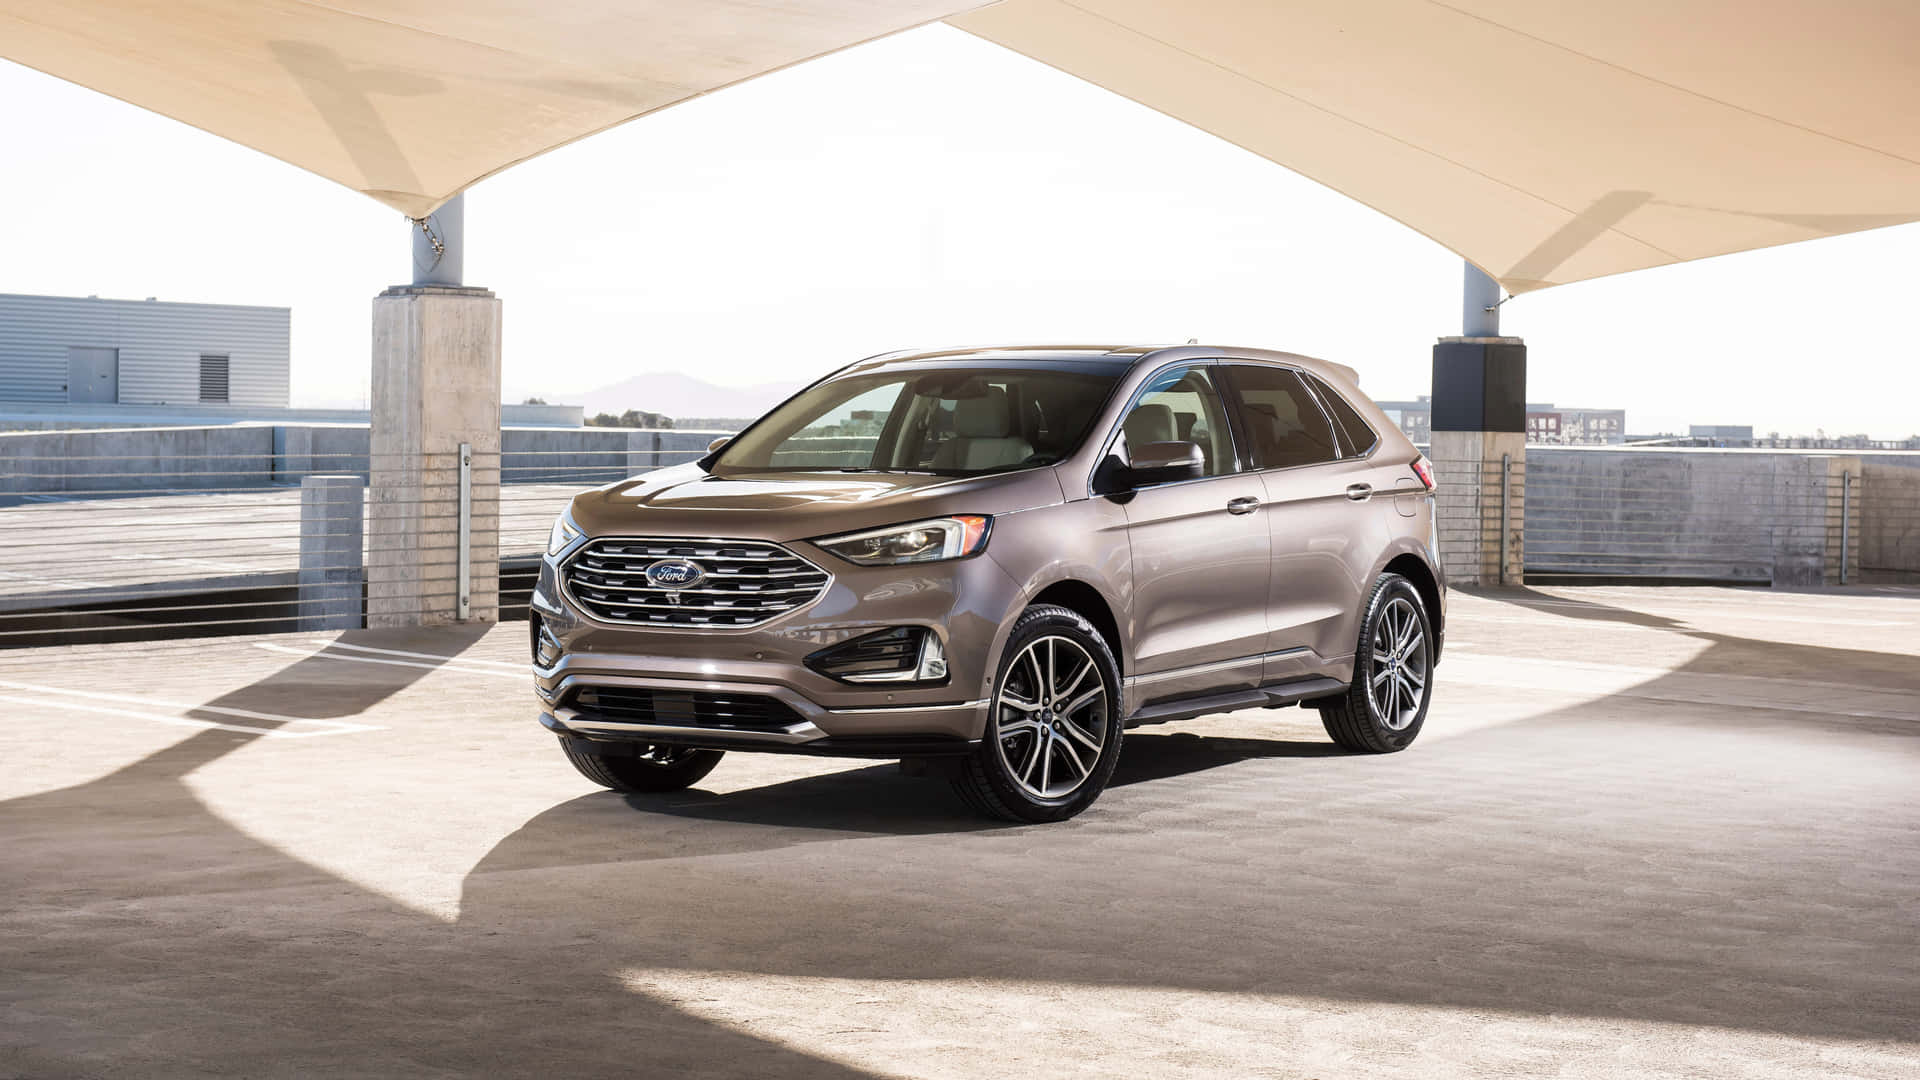 The Rugged&Stylish Ford Edge Wallpaper